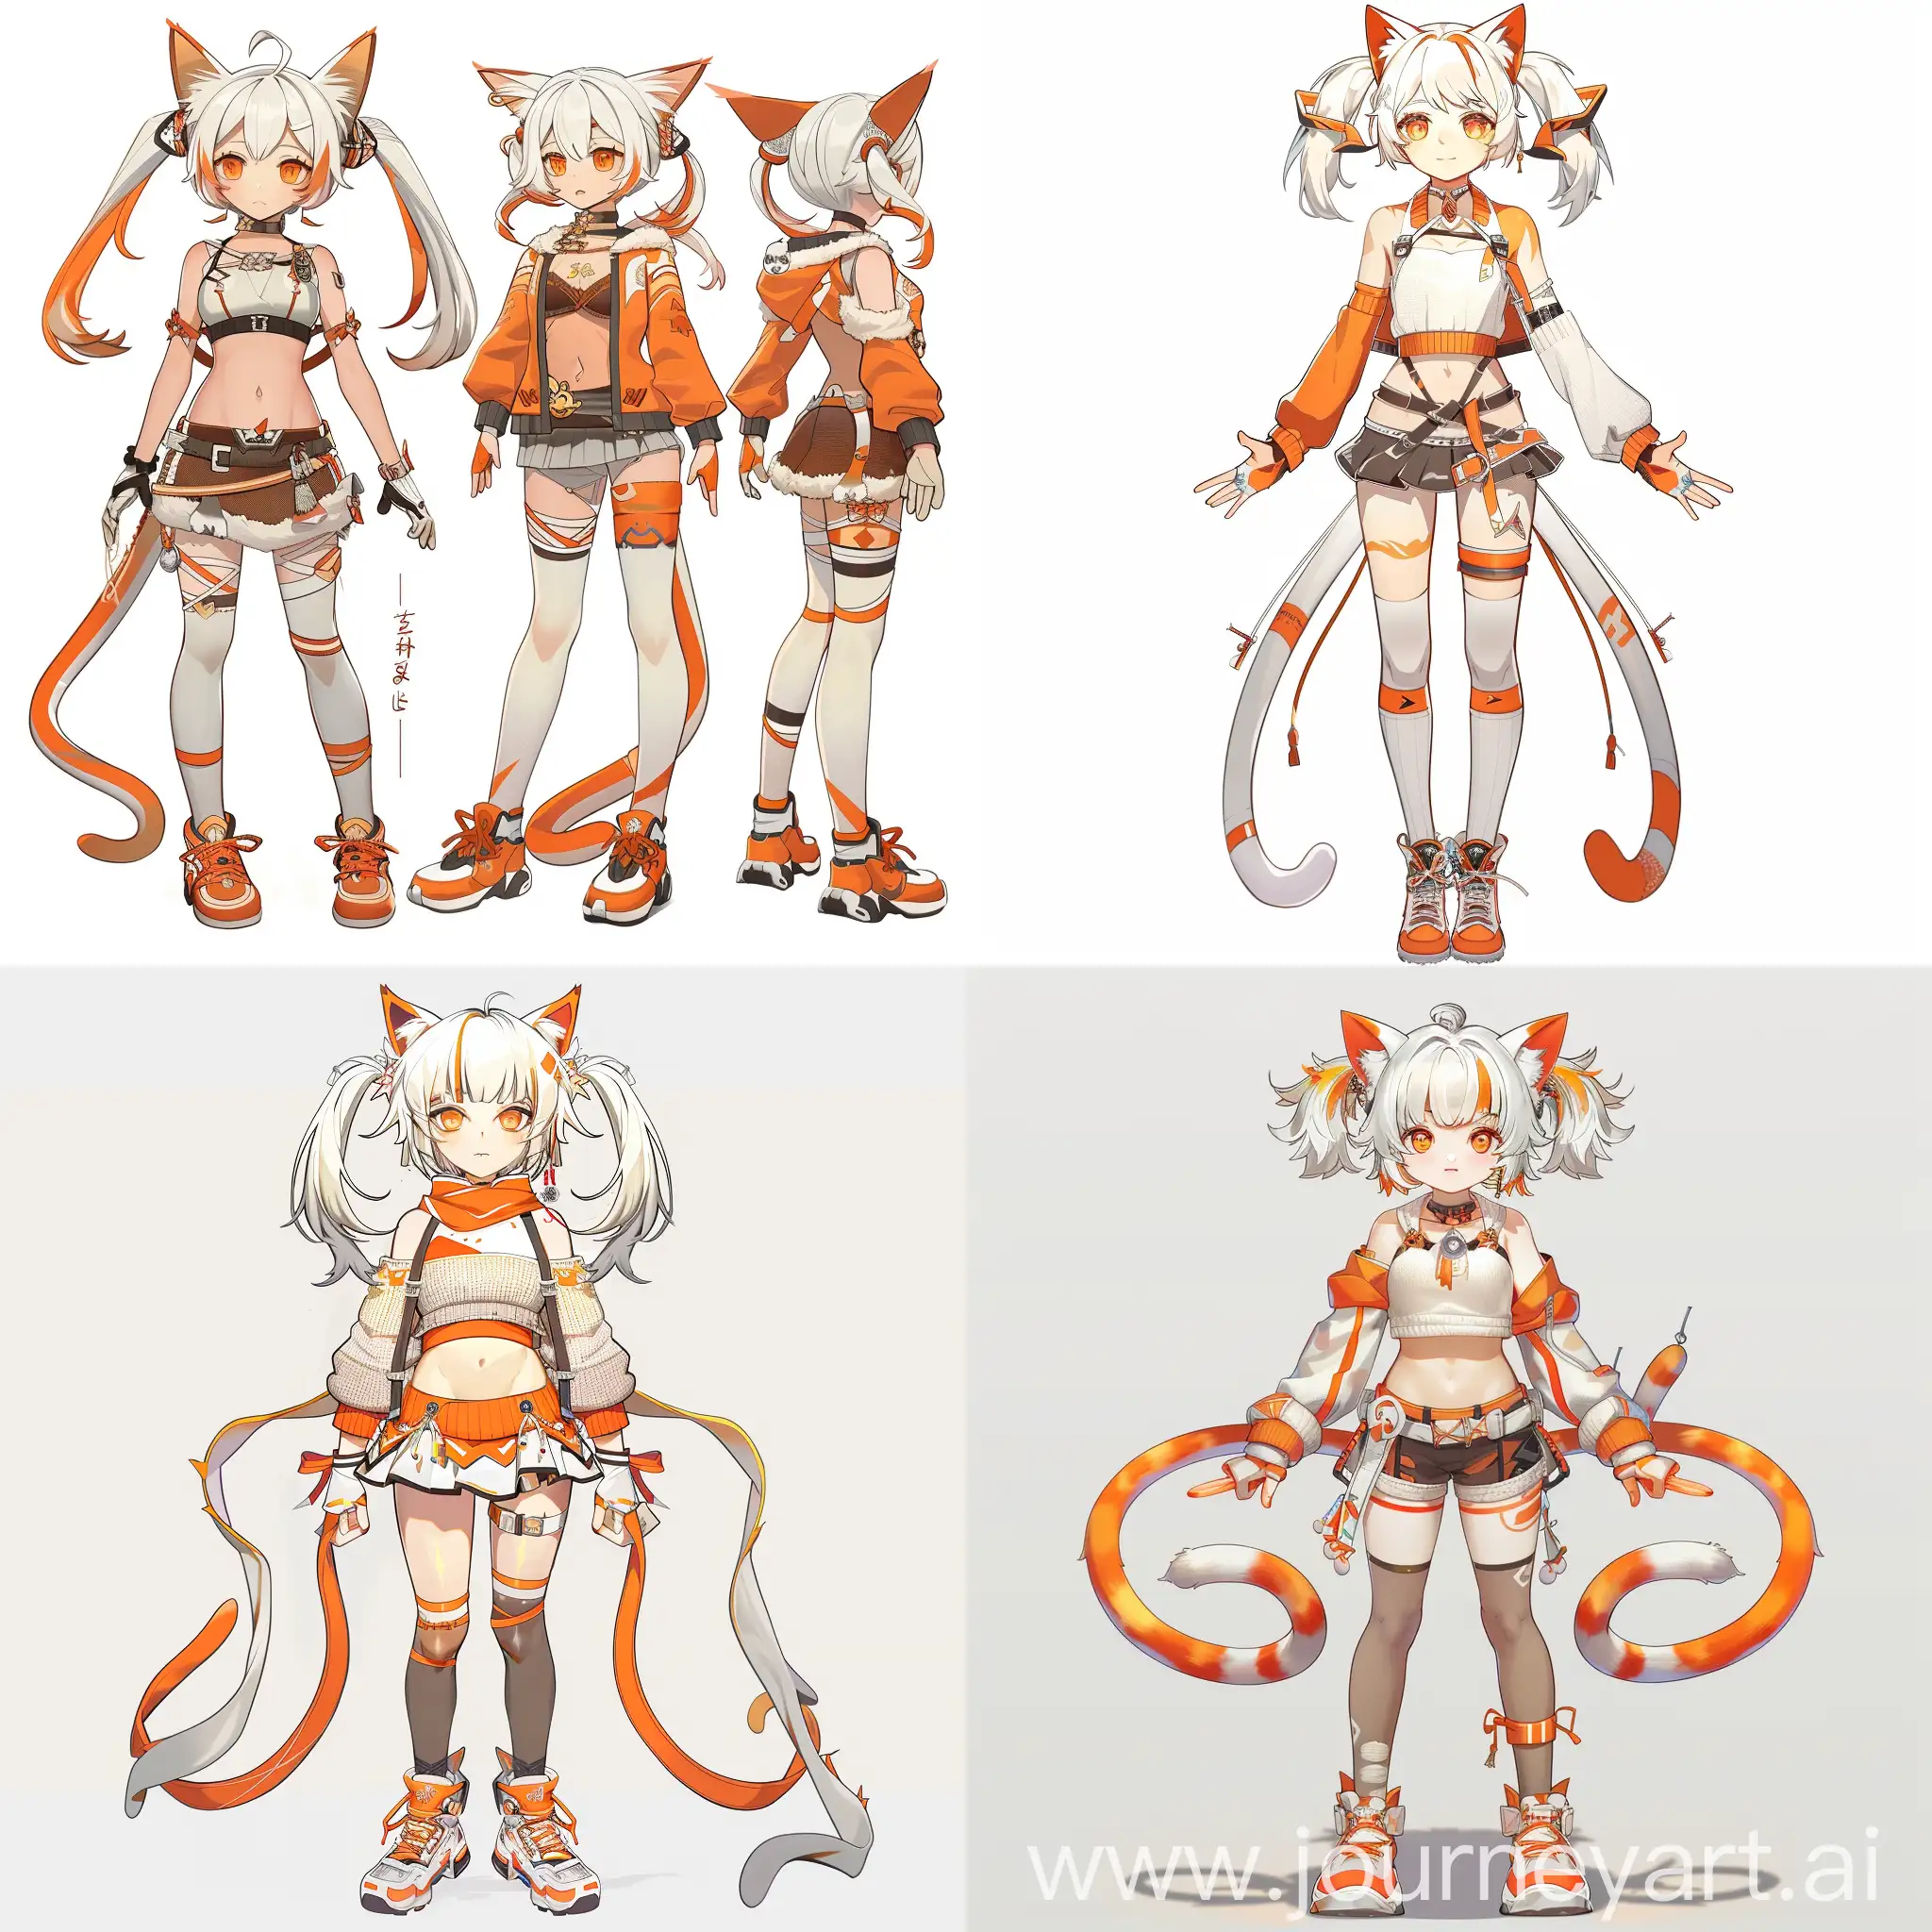 Genshin-Impact-Character-Cosplay-Playful-Girl-with-Cat-Ears-and-Unique-Fashion-Ensemble